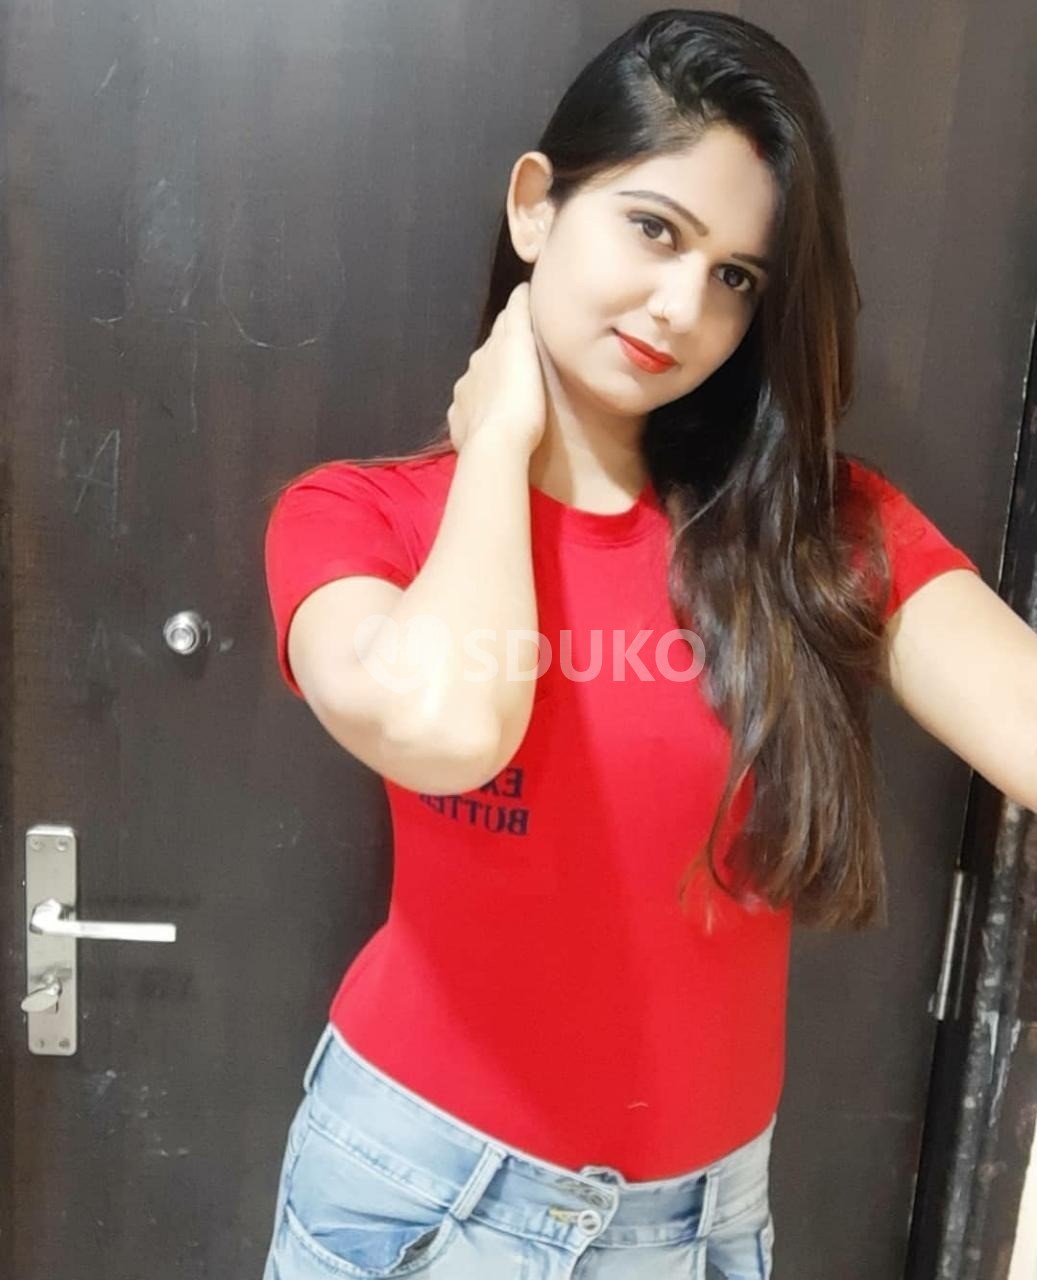 Velachery ☎️ VIP LOW PRICE (Kavya) ESCORT FULL HARD FUCK WITH NAUGHTY IF YOU WANT TO FUCK MY PUSSY WITH BIG BOOBS GI